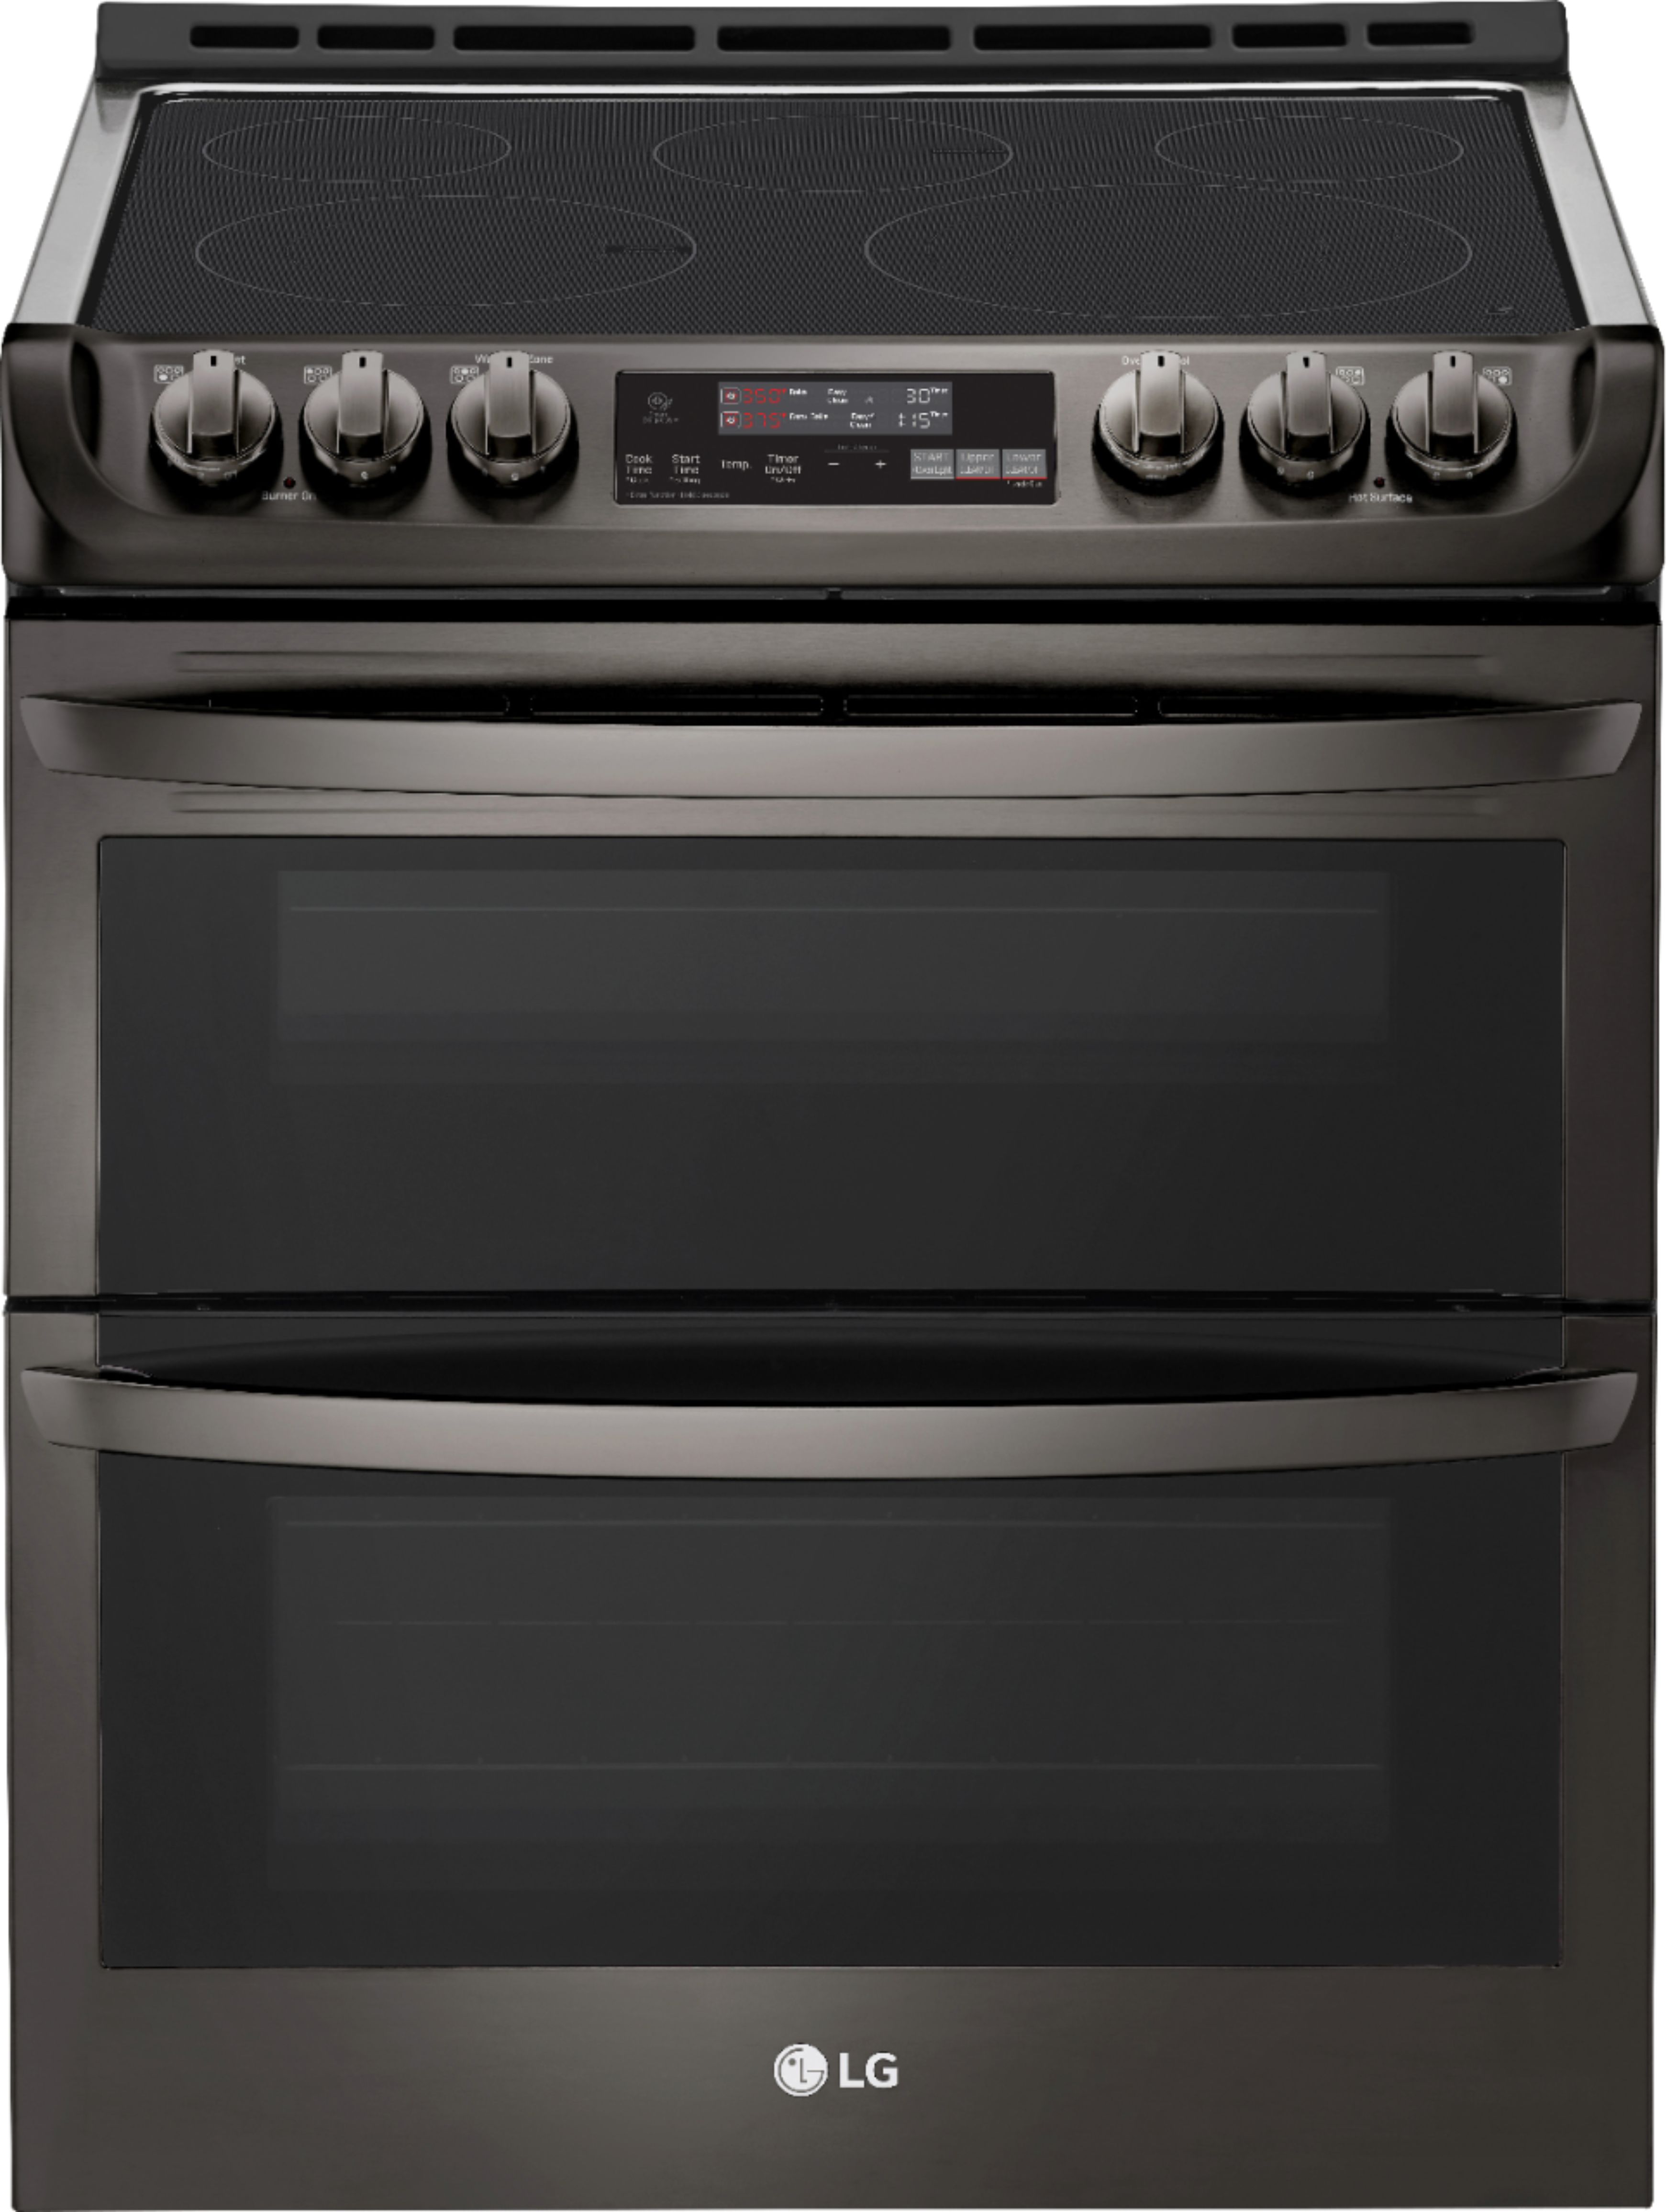 LG - 7.3 Cu. Ft. Smart Slide-In Double Oven Electric True Convection